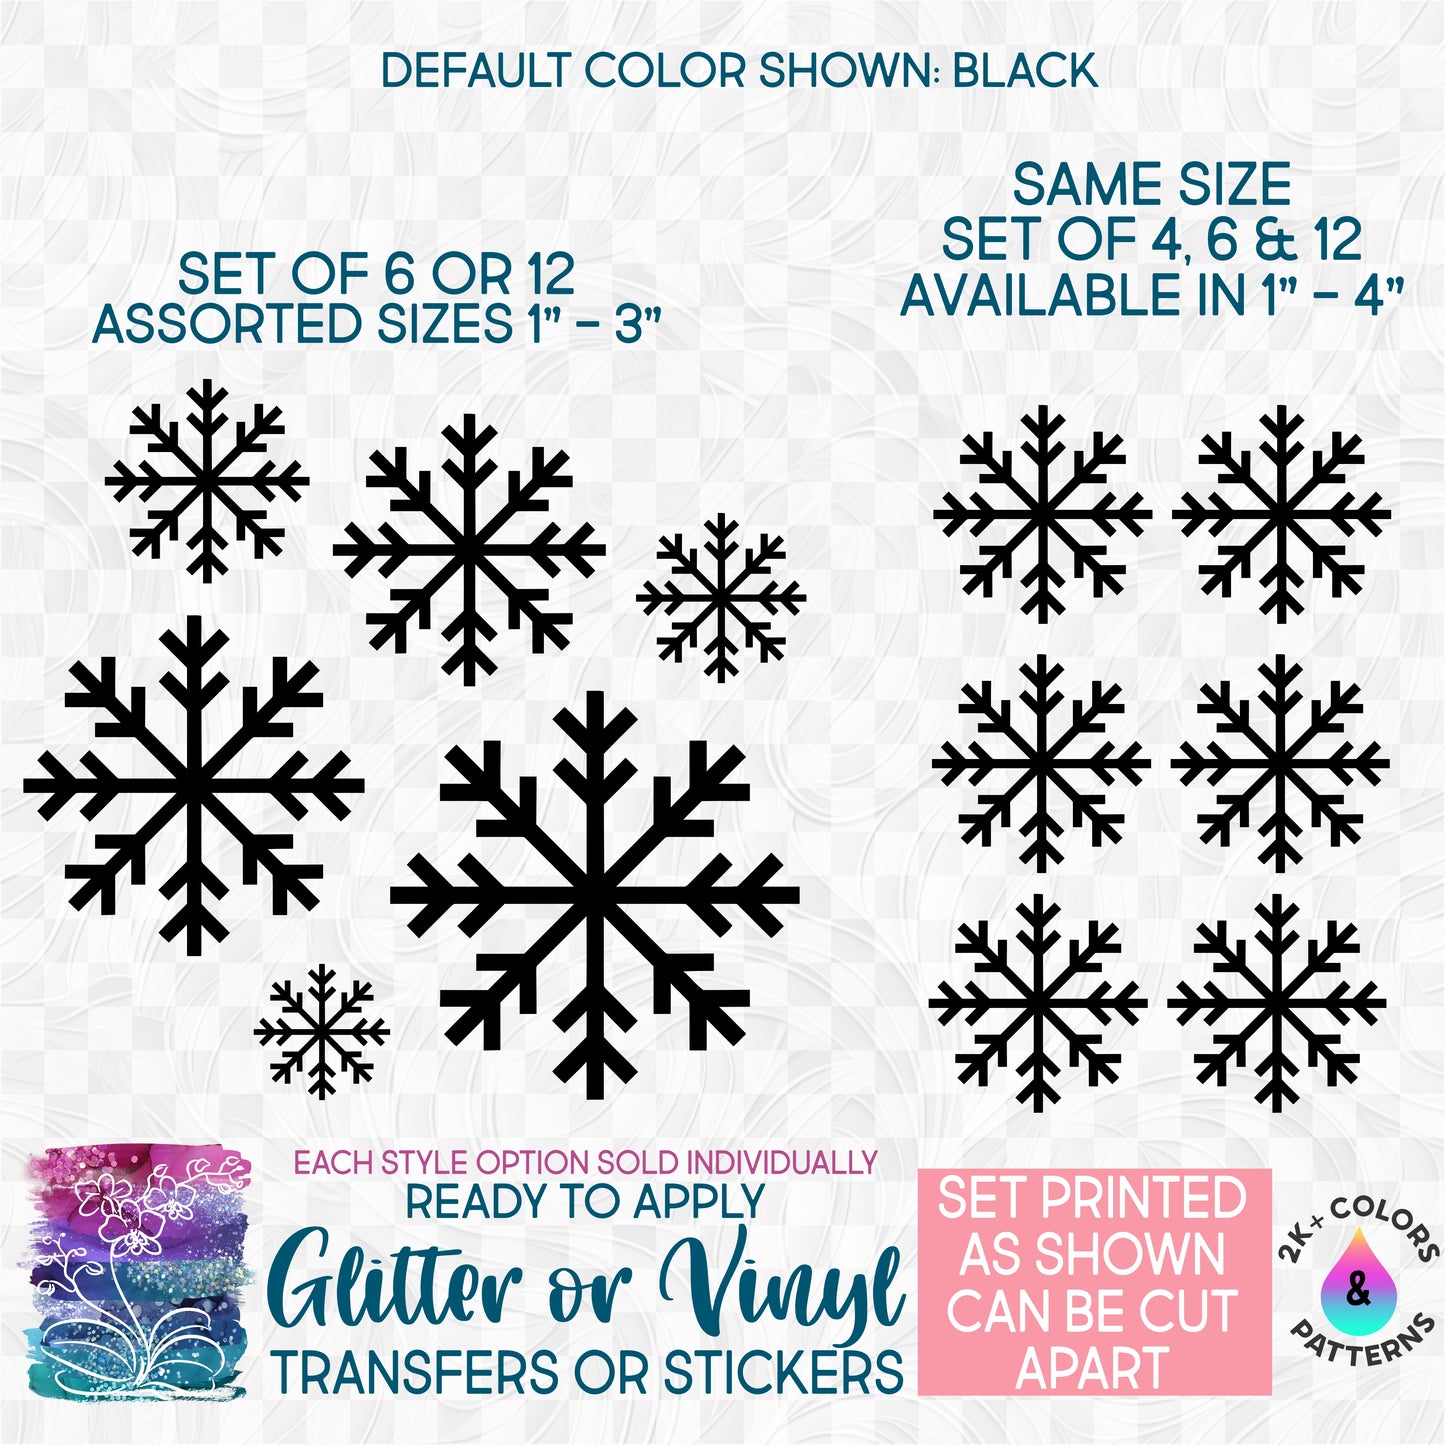 SBS-46-S4 Snowflake Snowflakes Shapes Set of 4, 6 or 12 Same or Assorted Sizes Made-to-Order Iron-On Transfer or Sticker